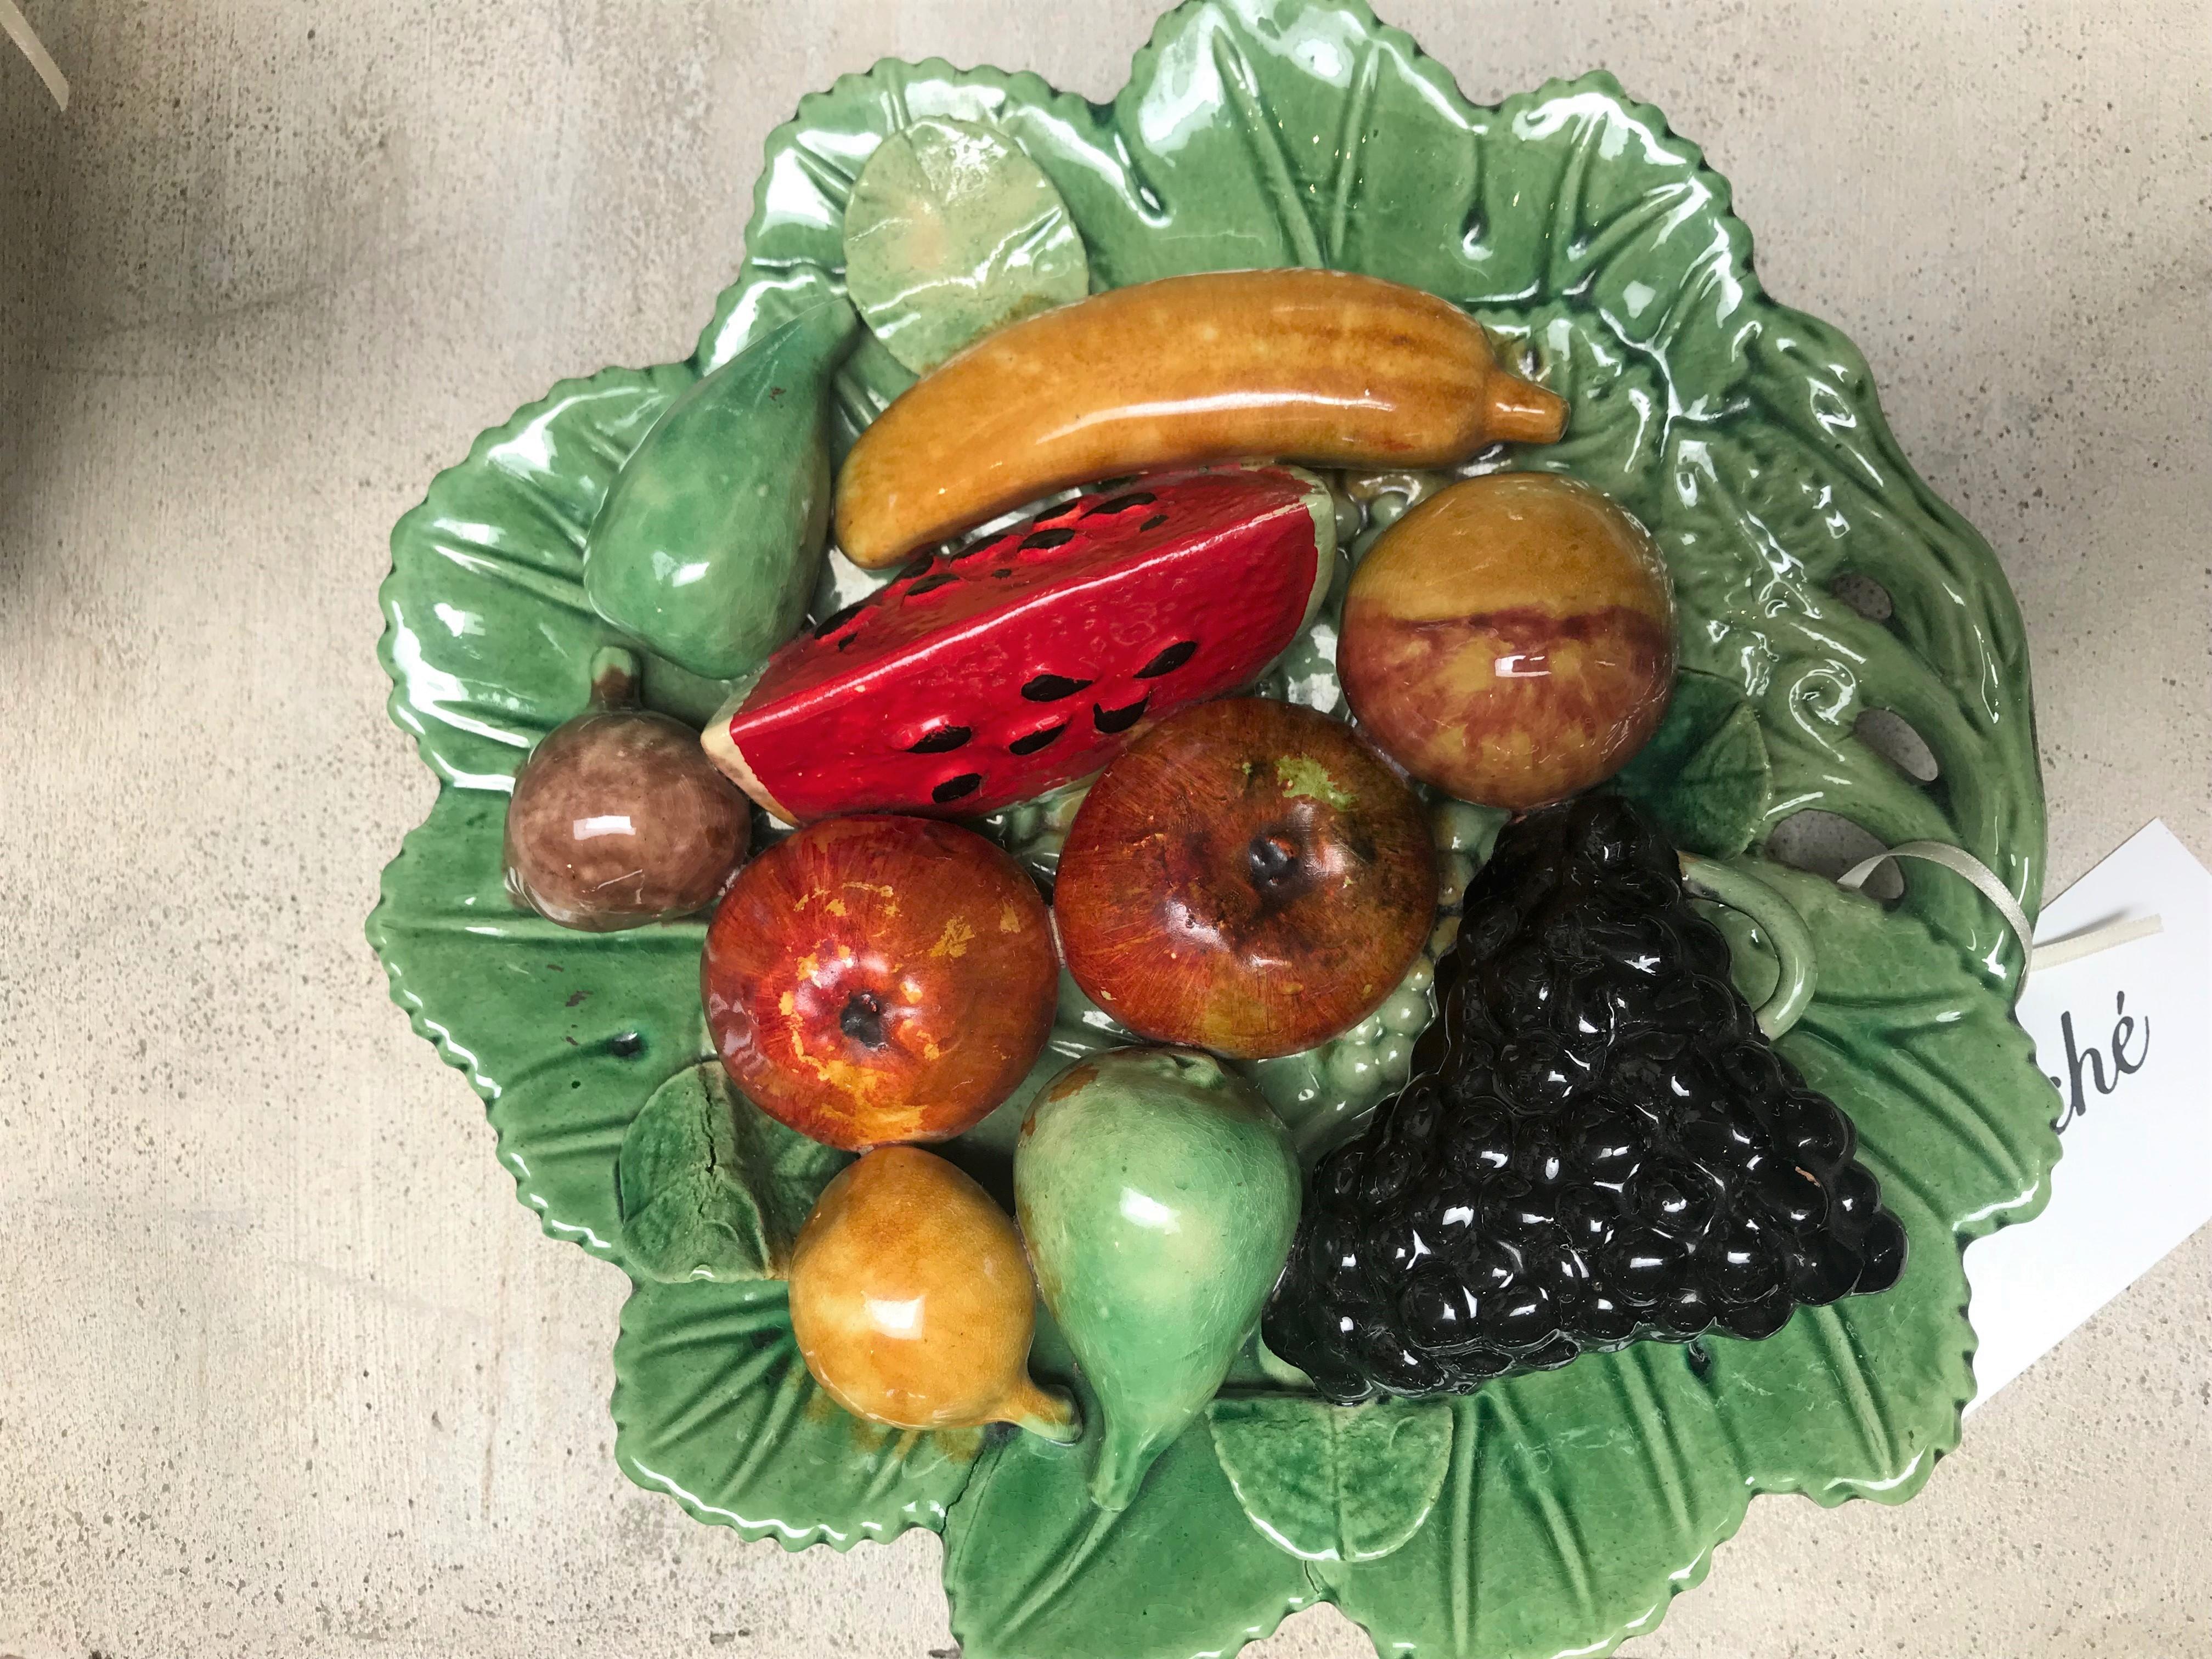 Vintage Palissey Style art pottery fruit and leaf plate
Measures: 9